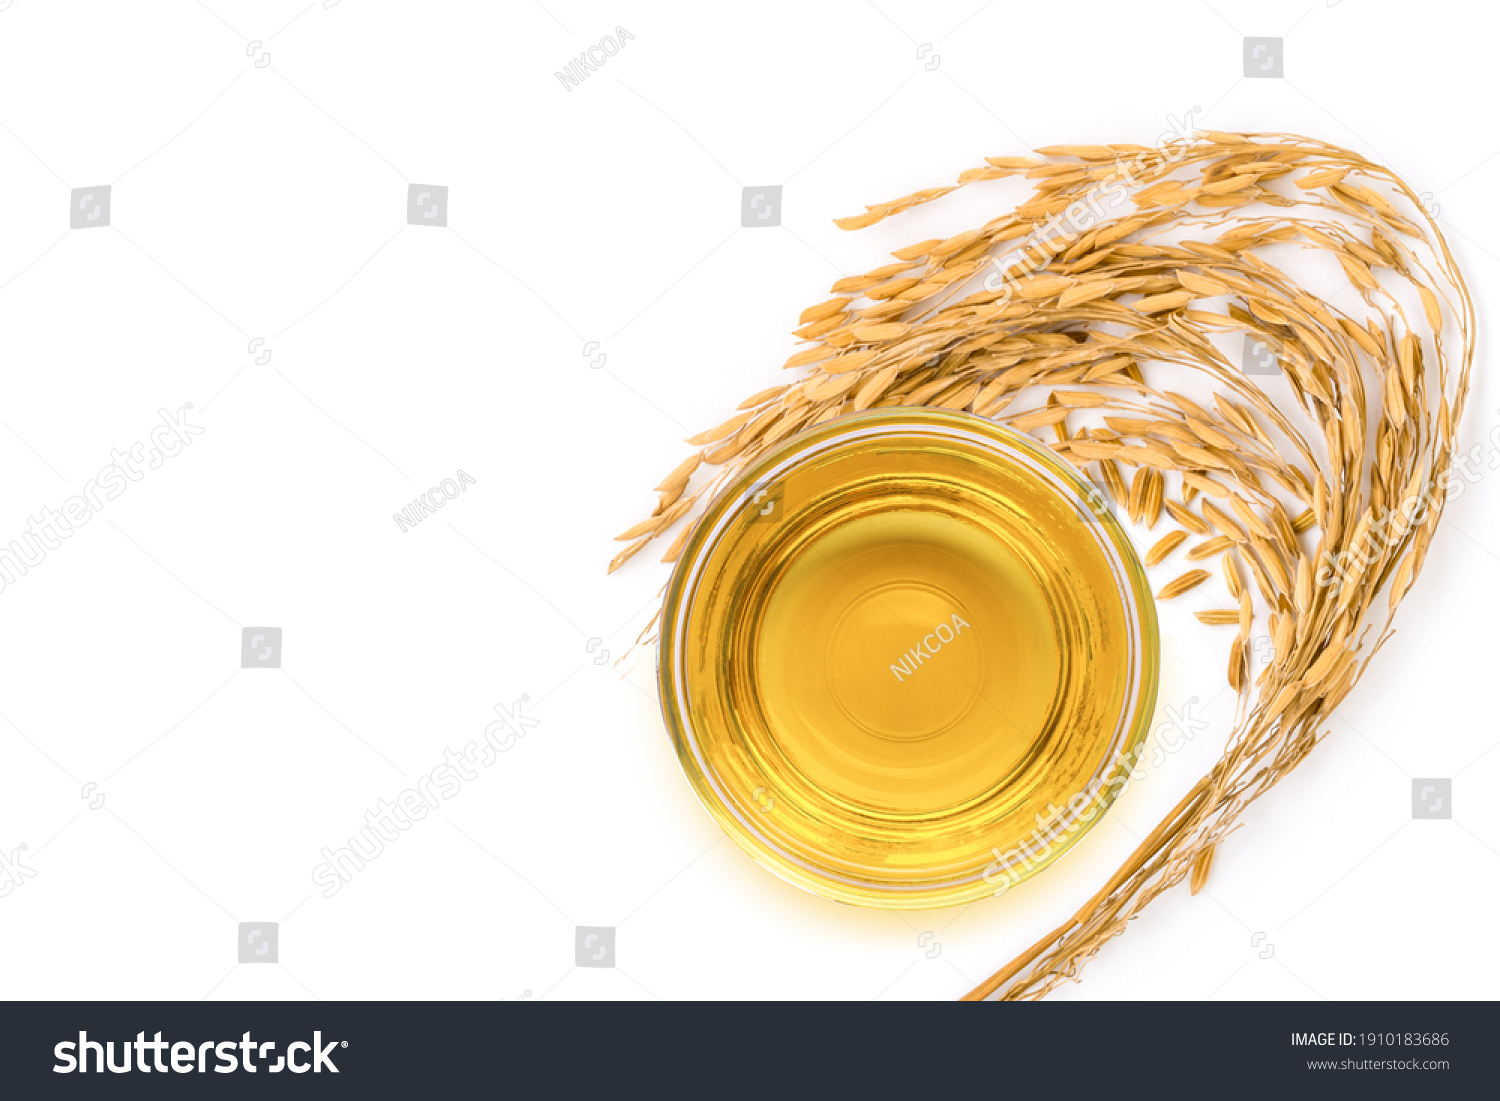 Rice bran oil extract with paddy unmilled rice on white background. Top view. Flat lay. #1910183686